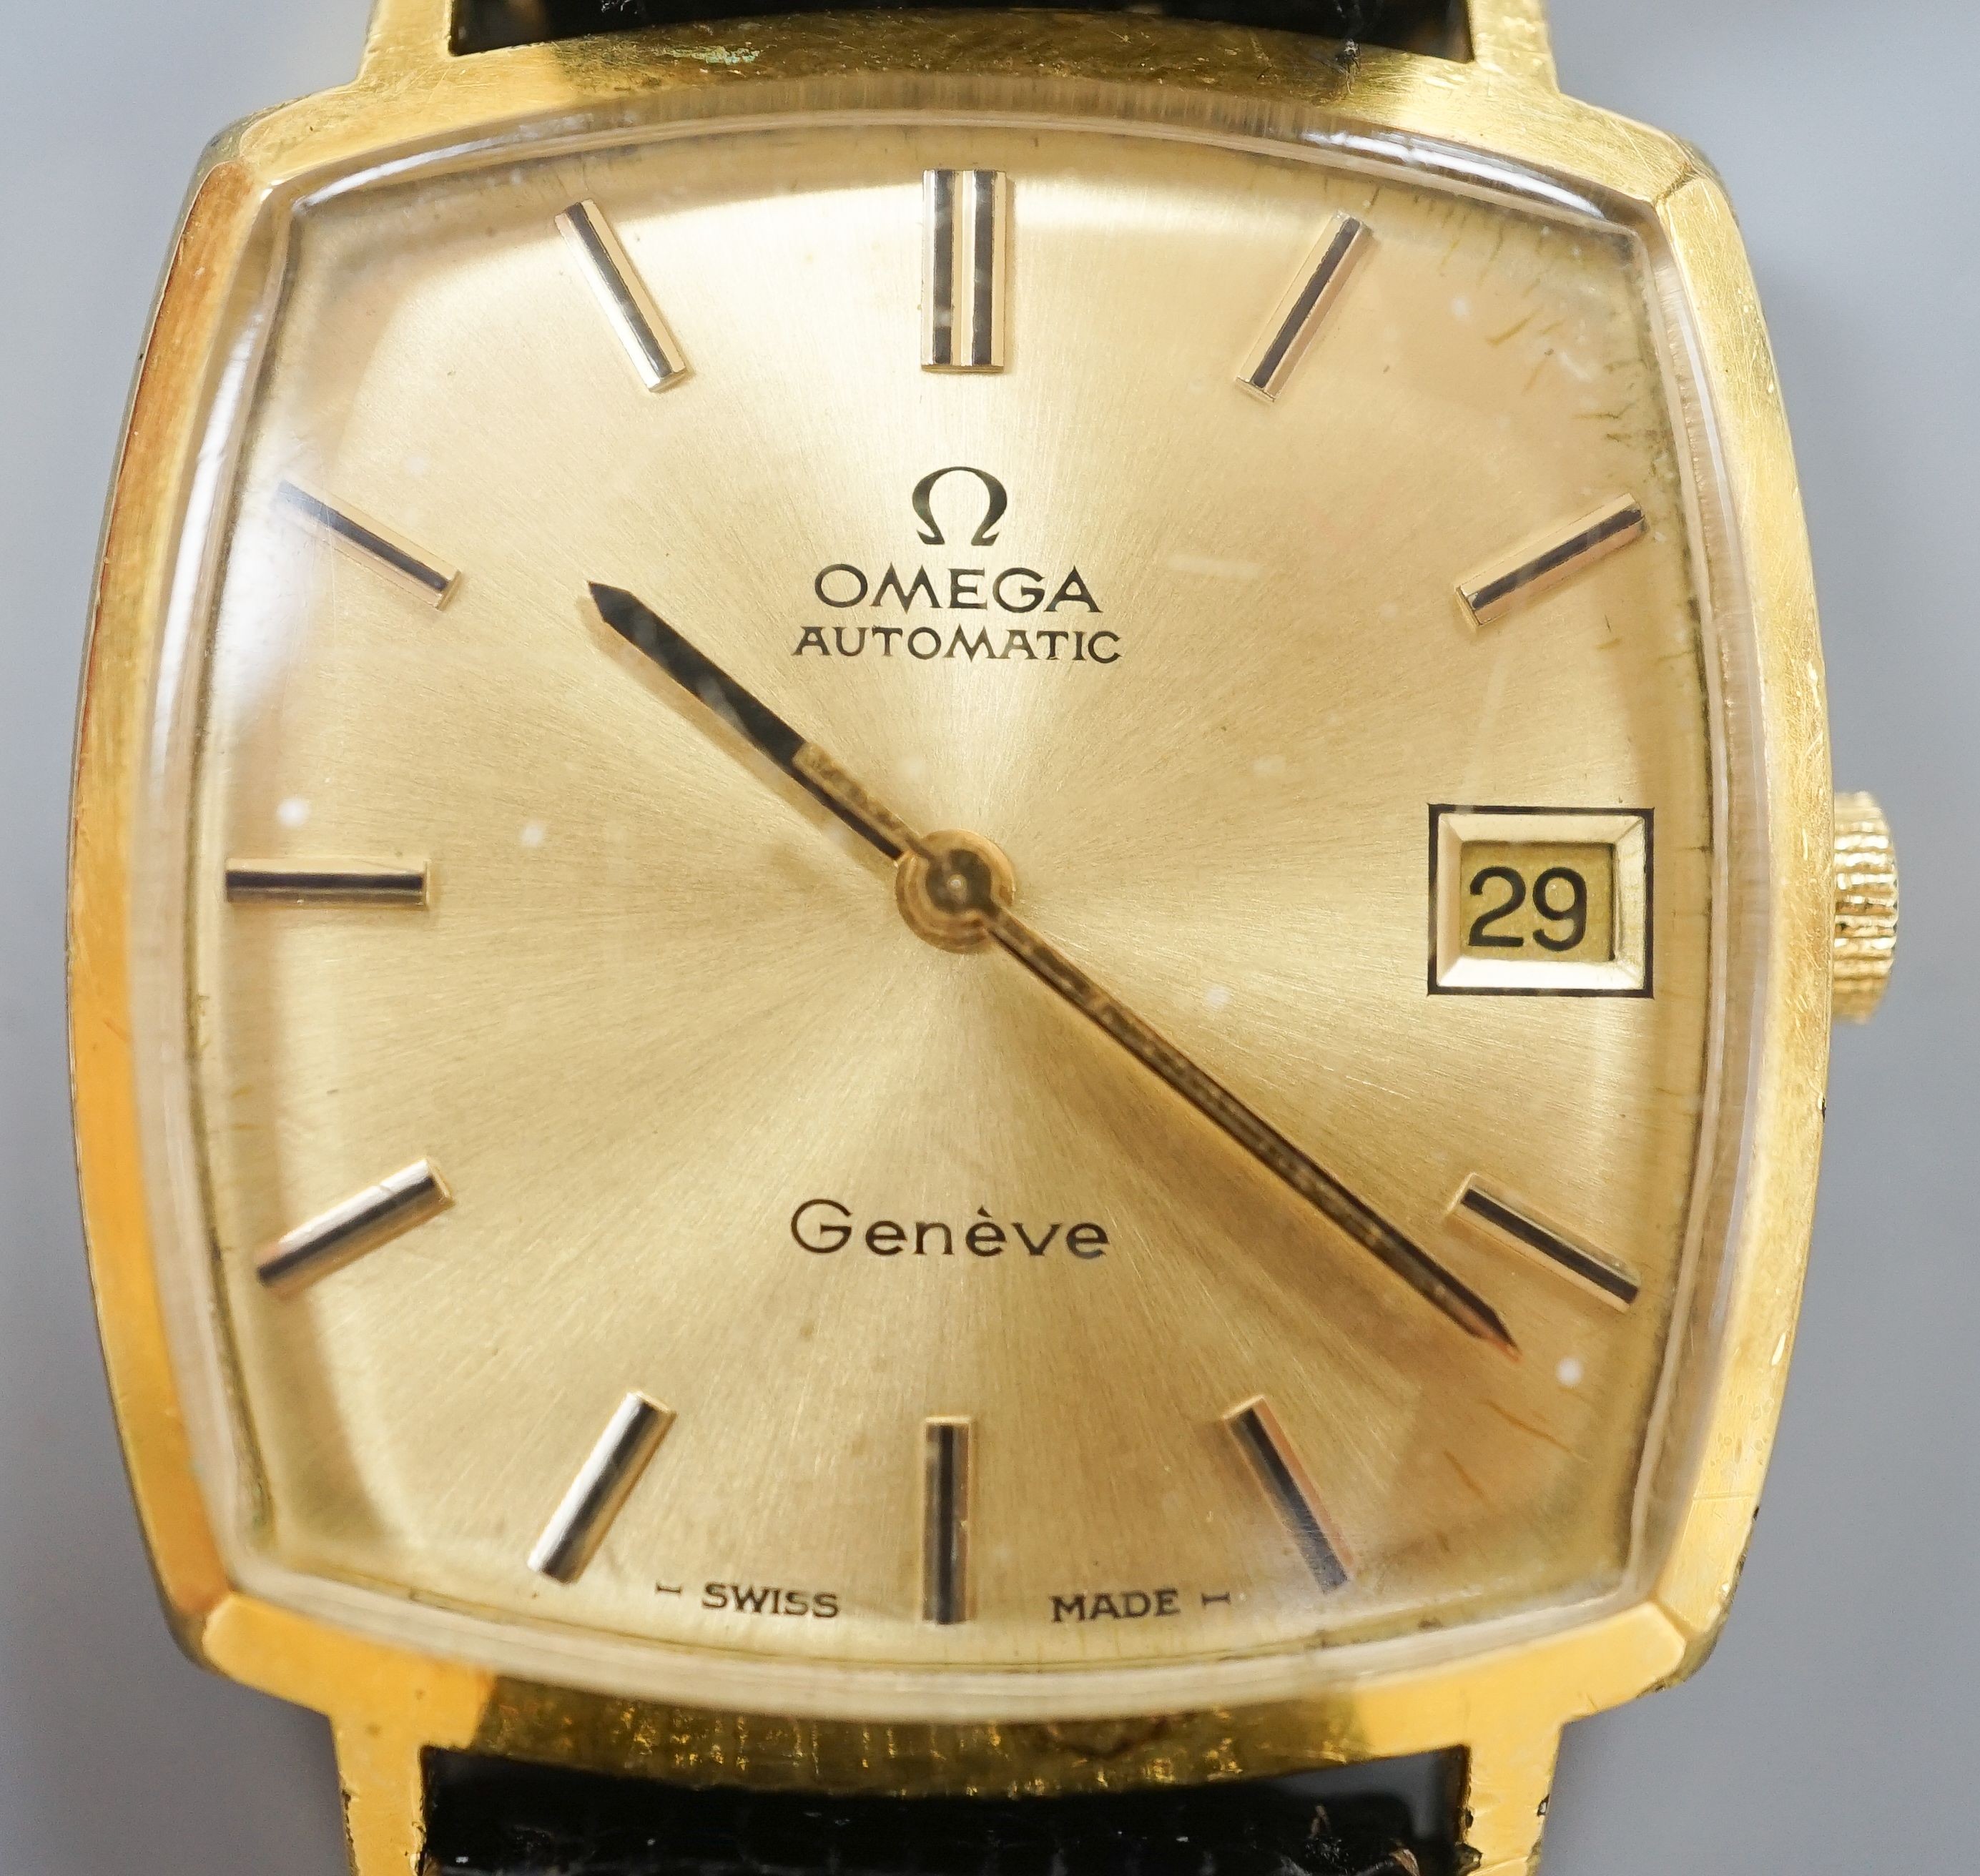 A gentleman's steel and gold plated Omega Automatic wrist watch, on associated leather strap, case diameter 32mm, with box, guarantee and spare strap.